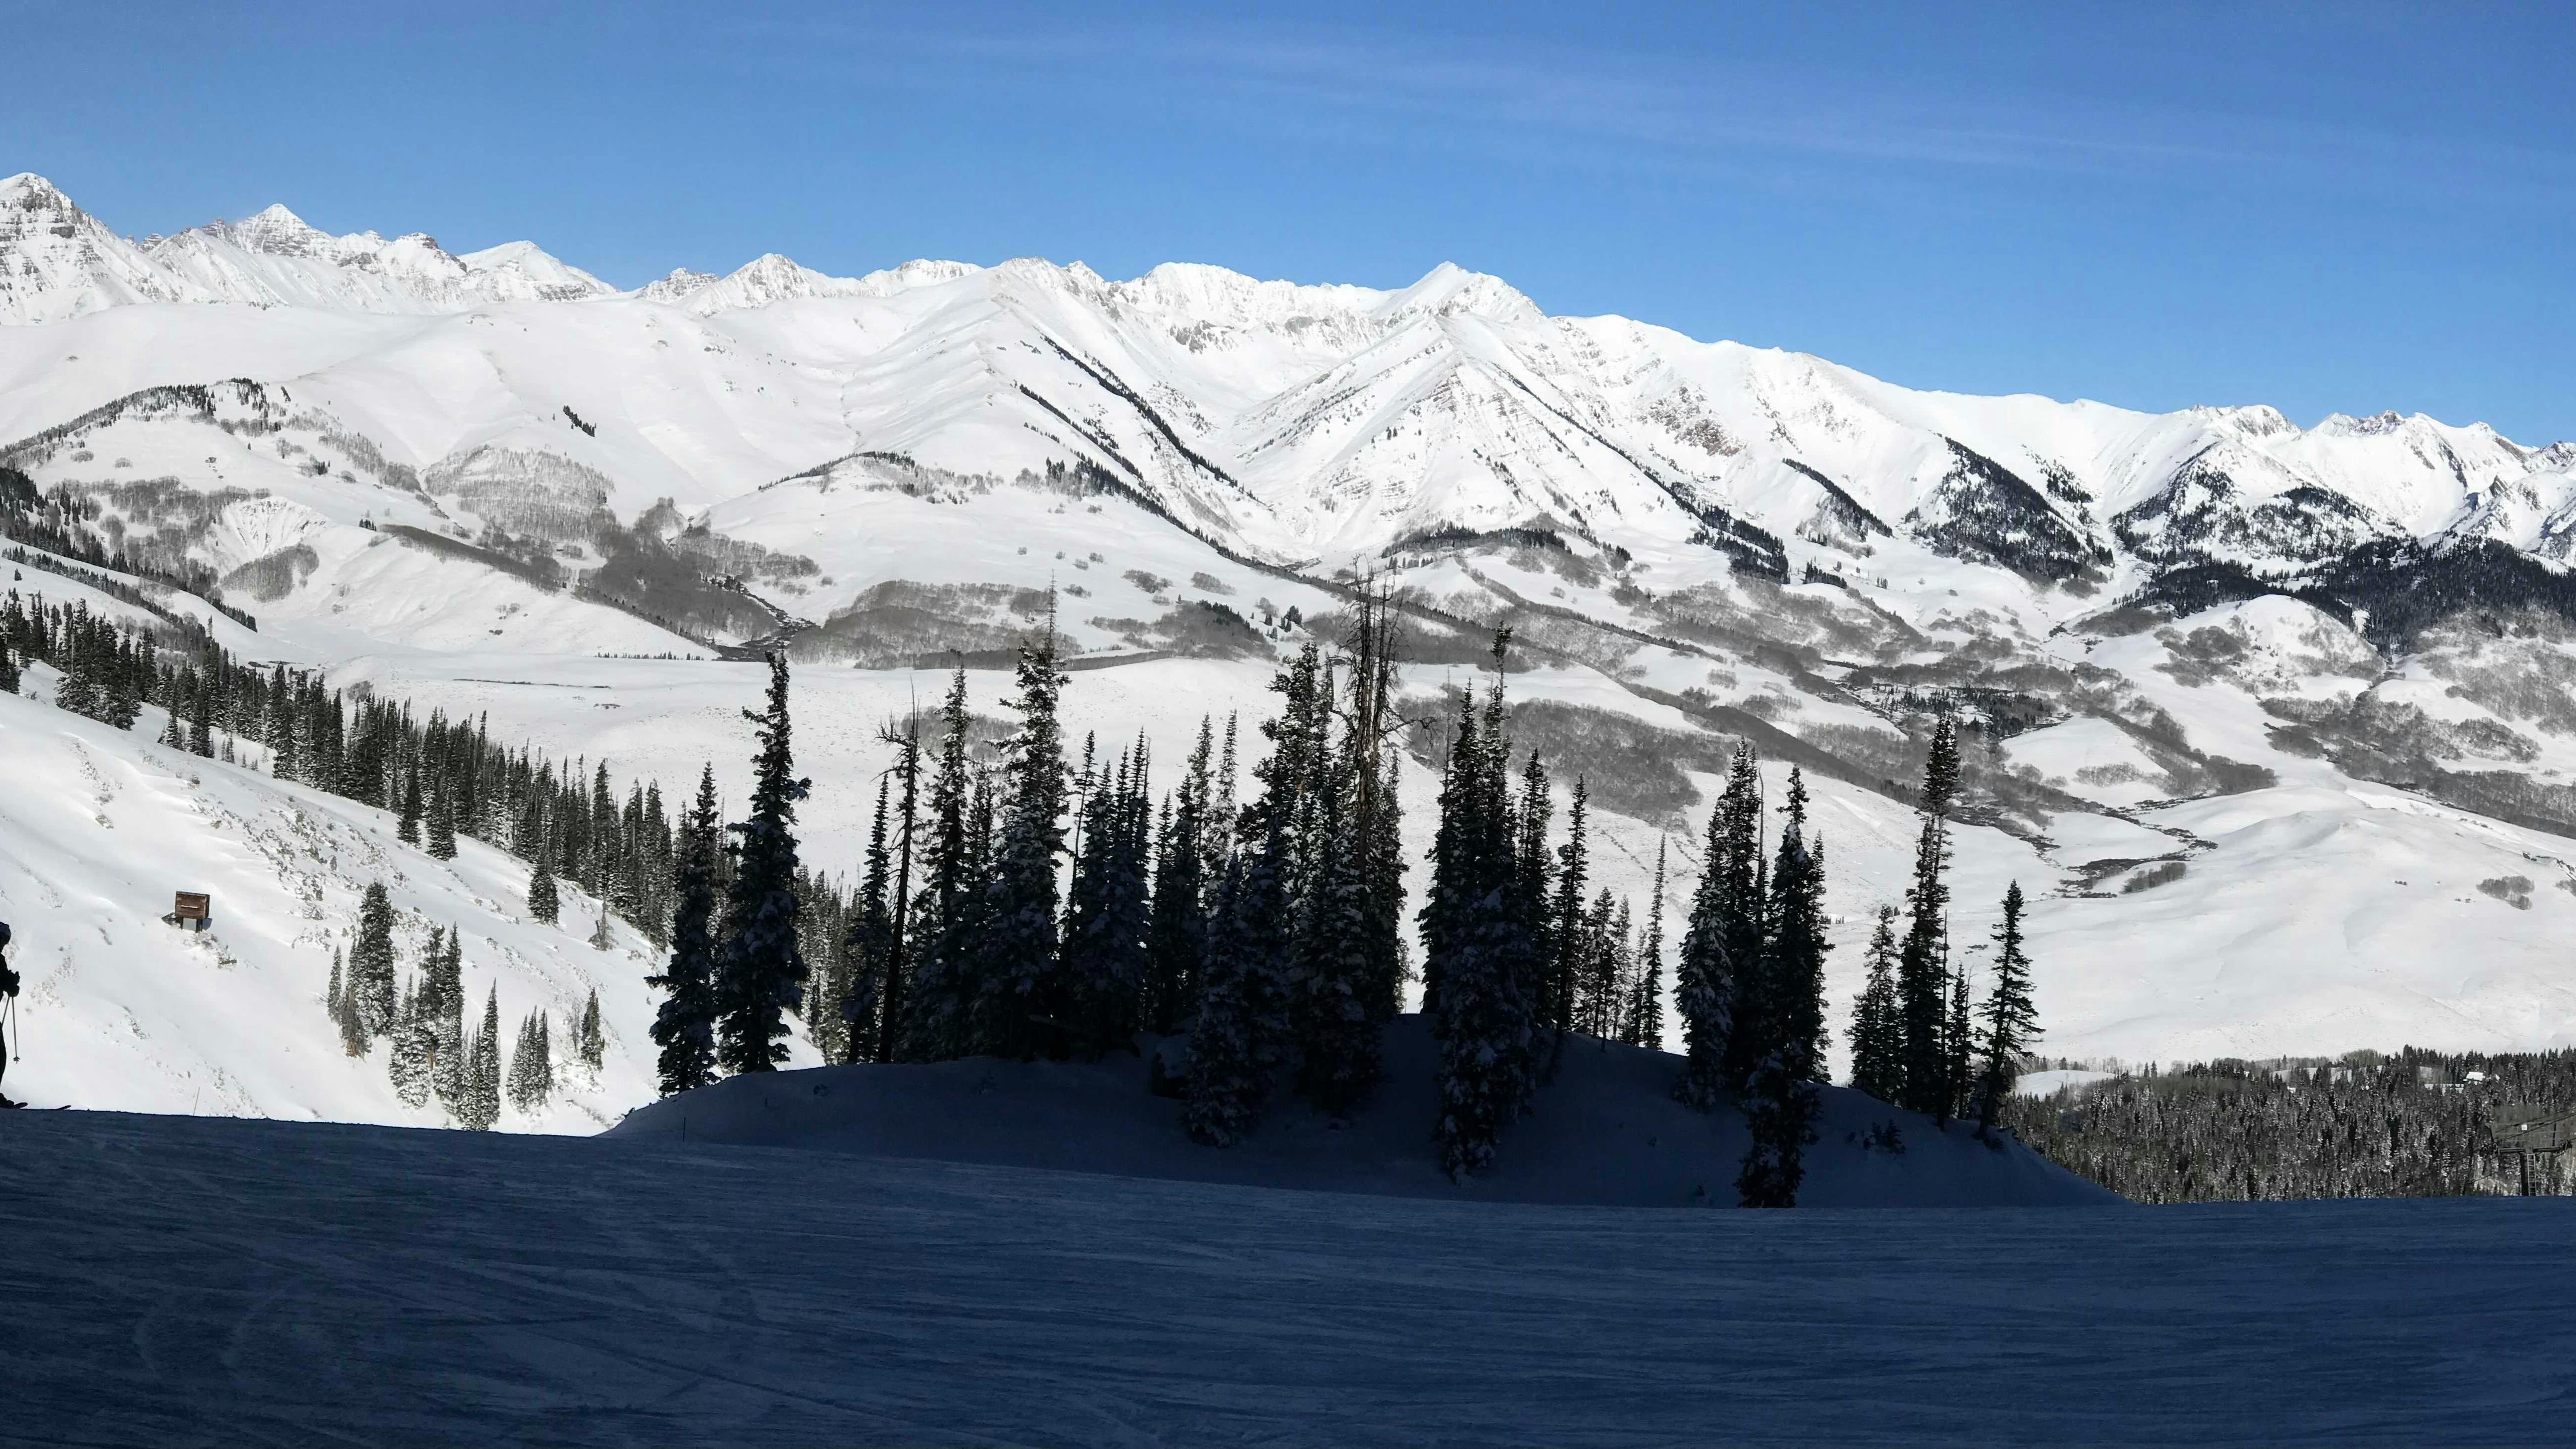 A panorama of a ski slope with someone skiing across in the shade of the mountain.